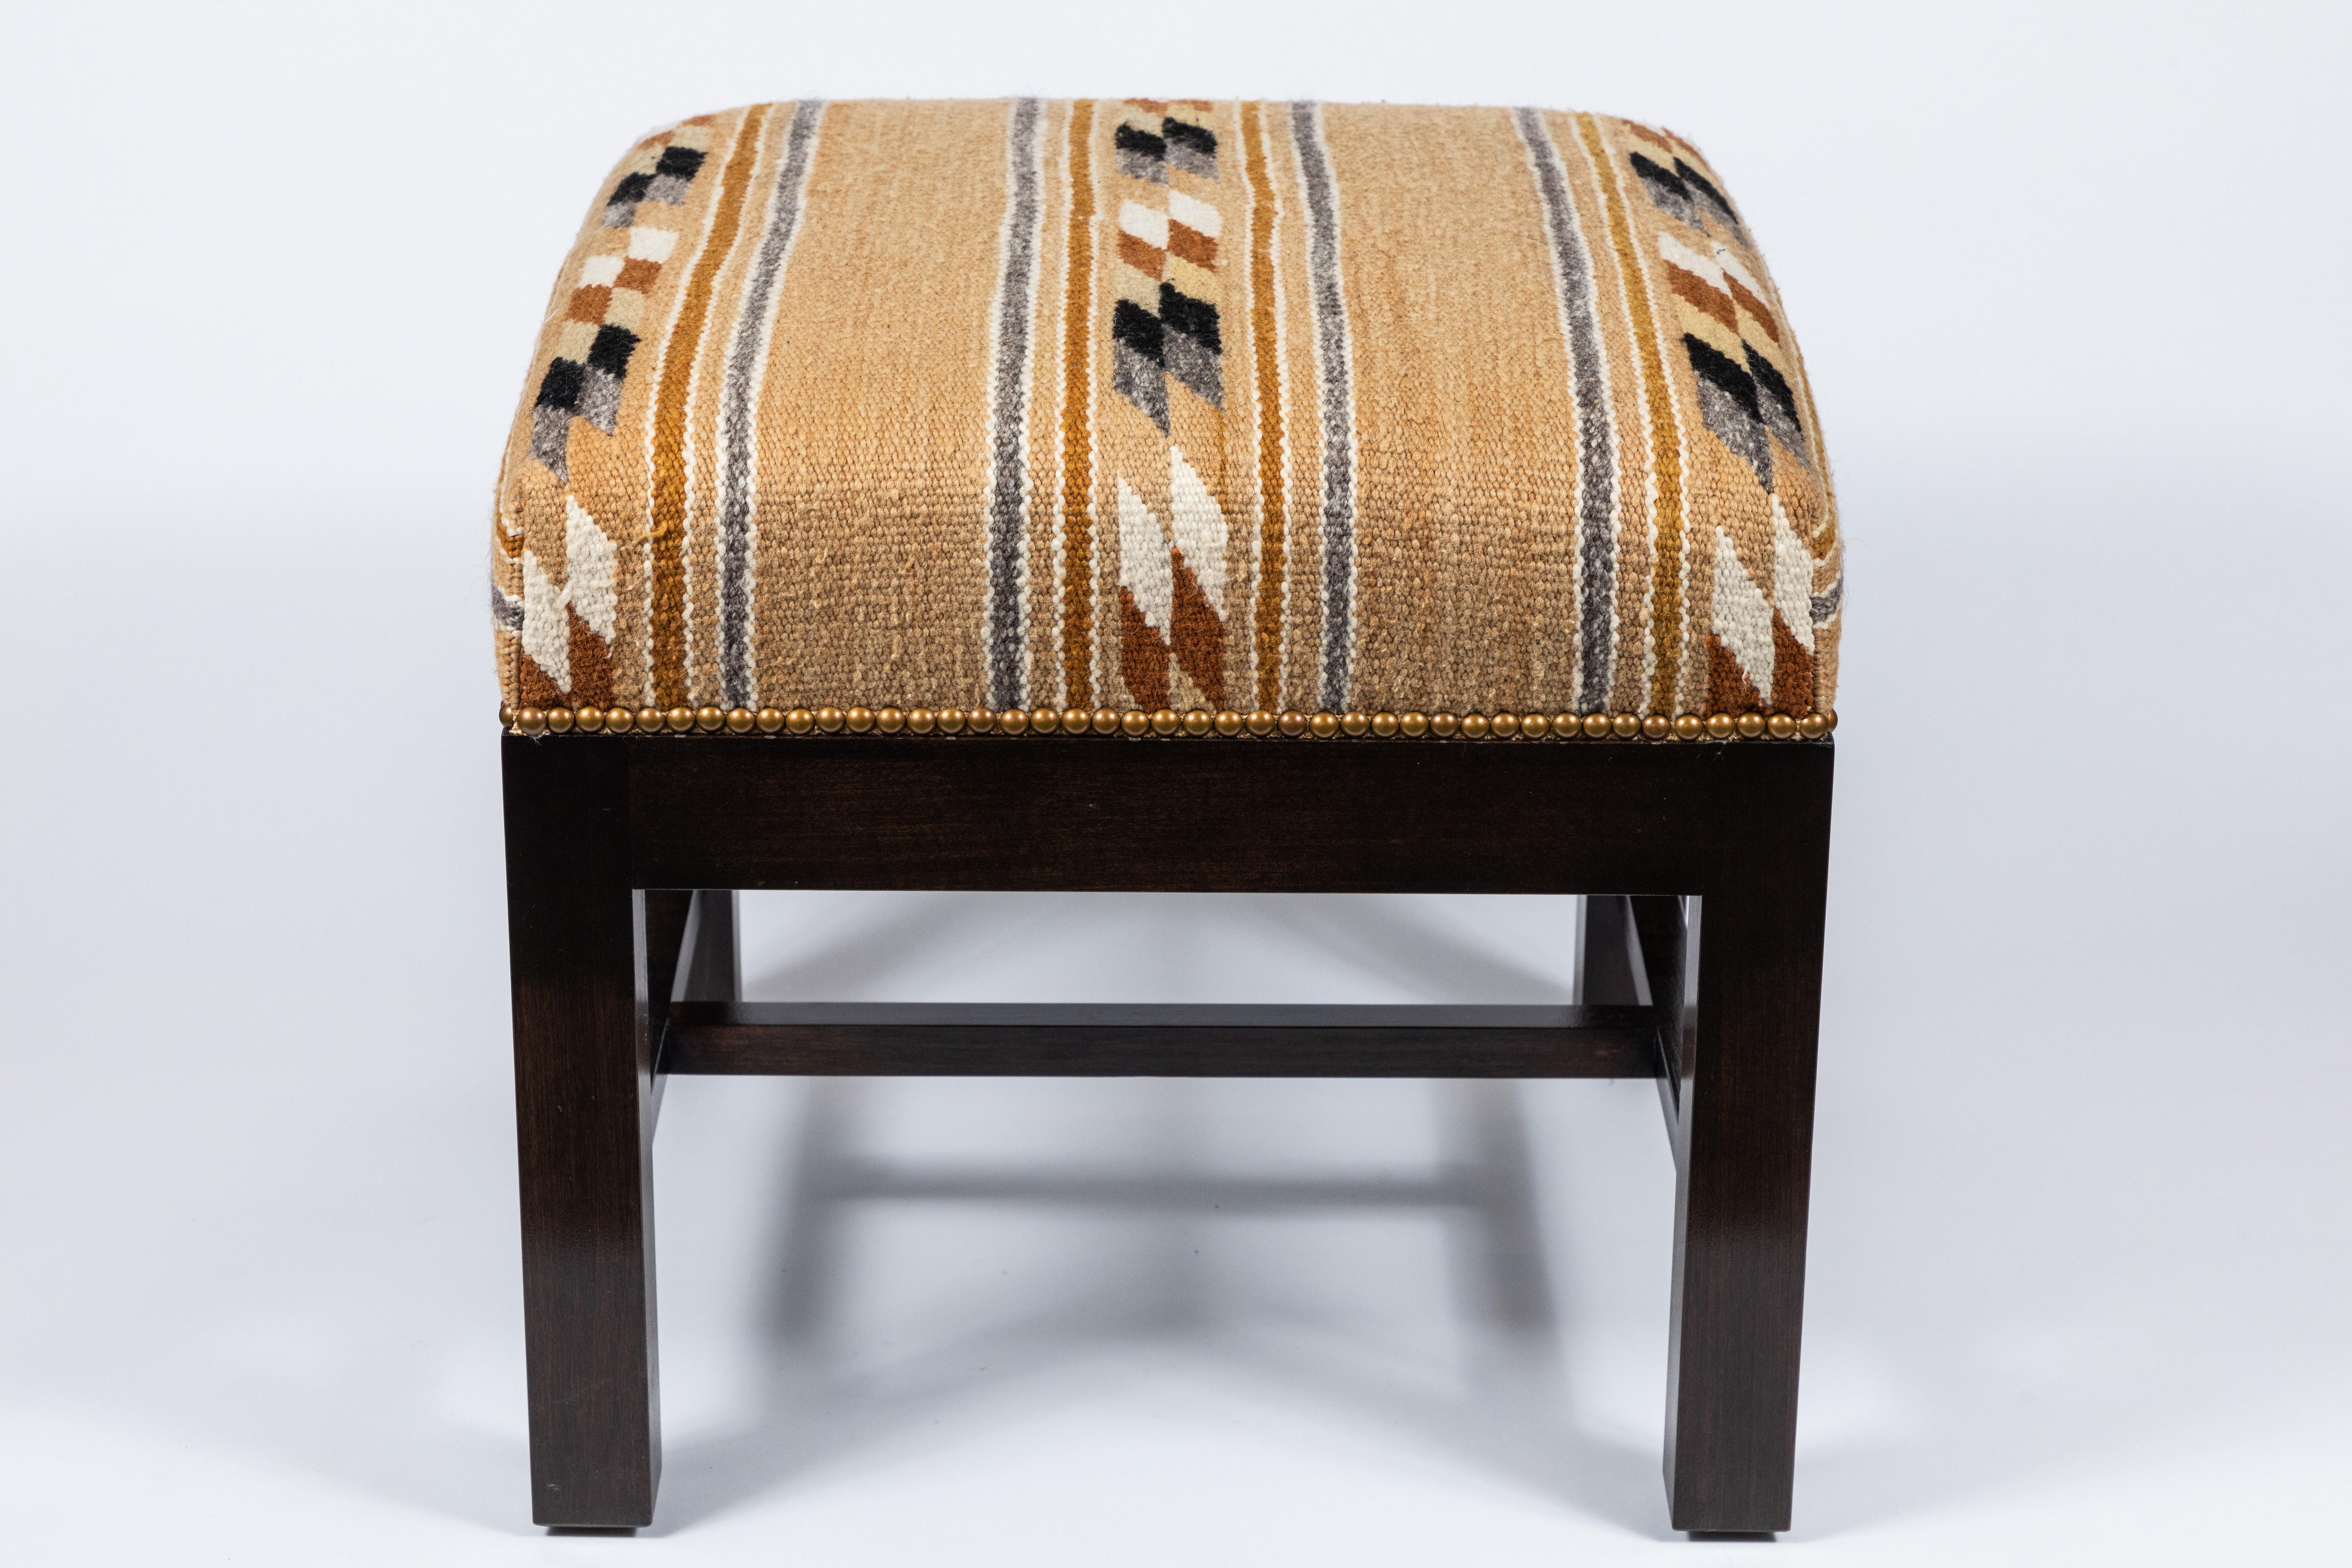 North American Square Ottoman with Walnut Finish Upholstered in a Vintage Native American Rug